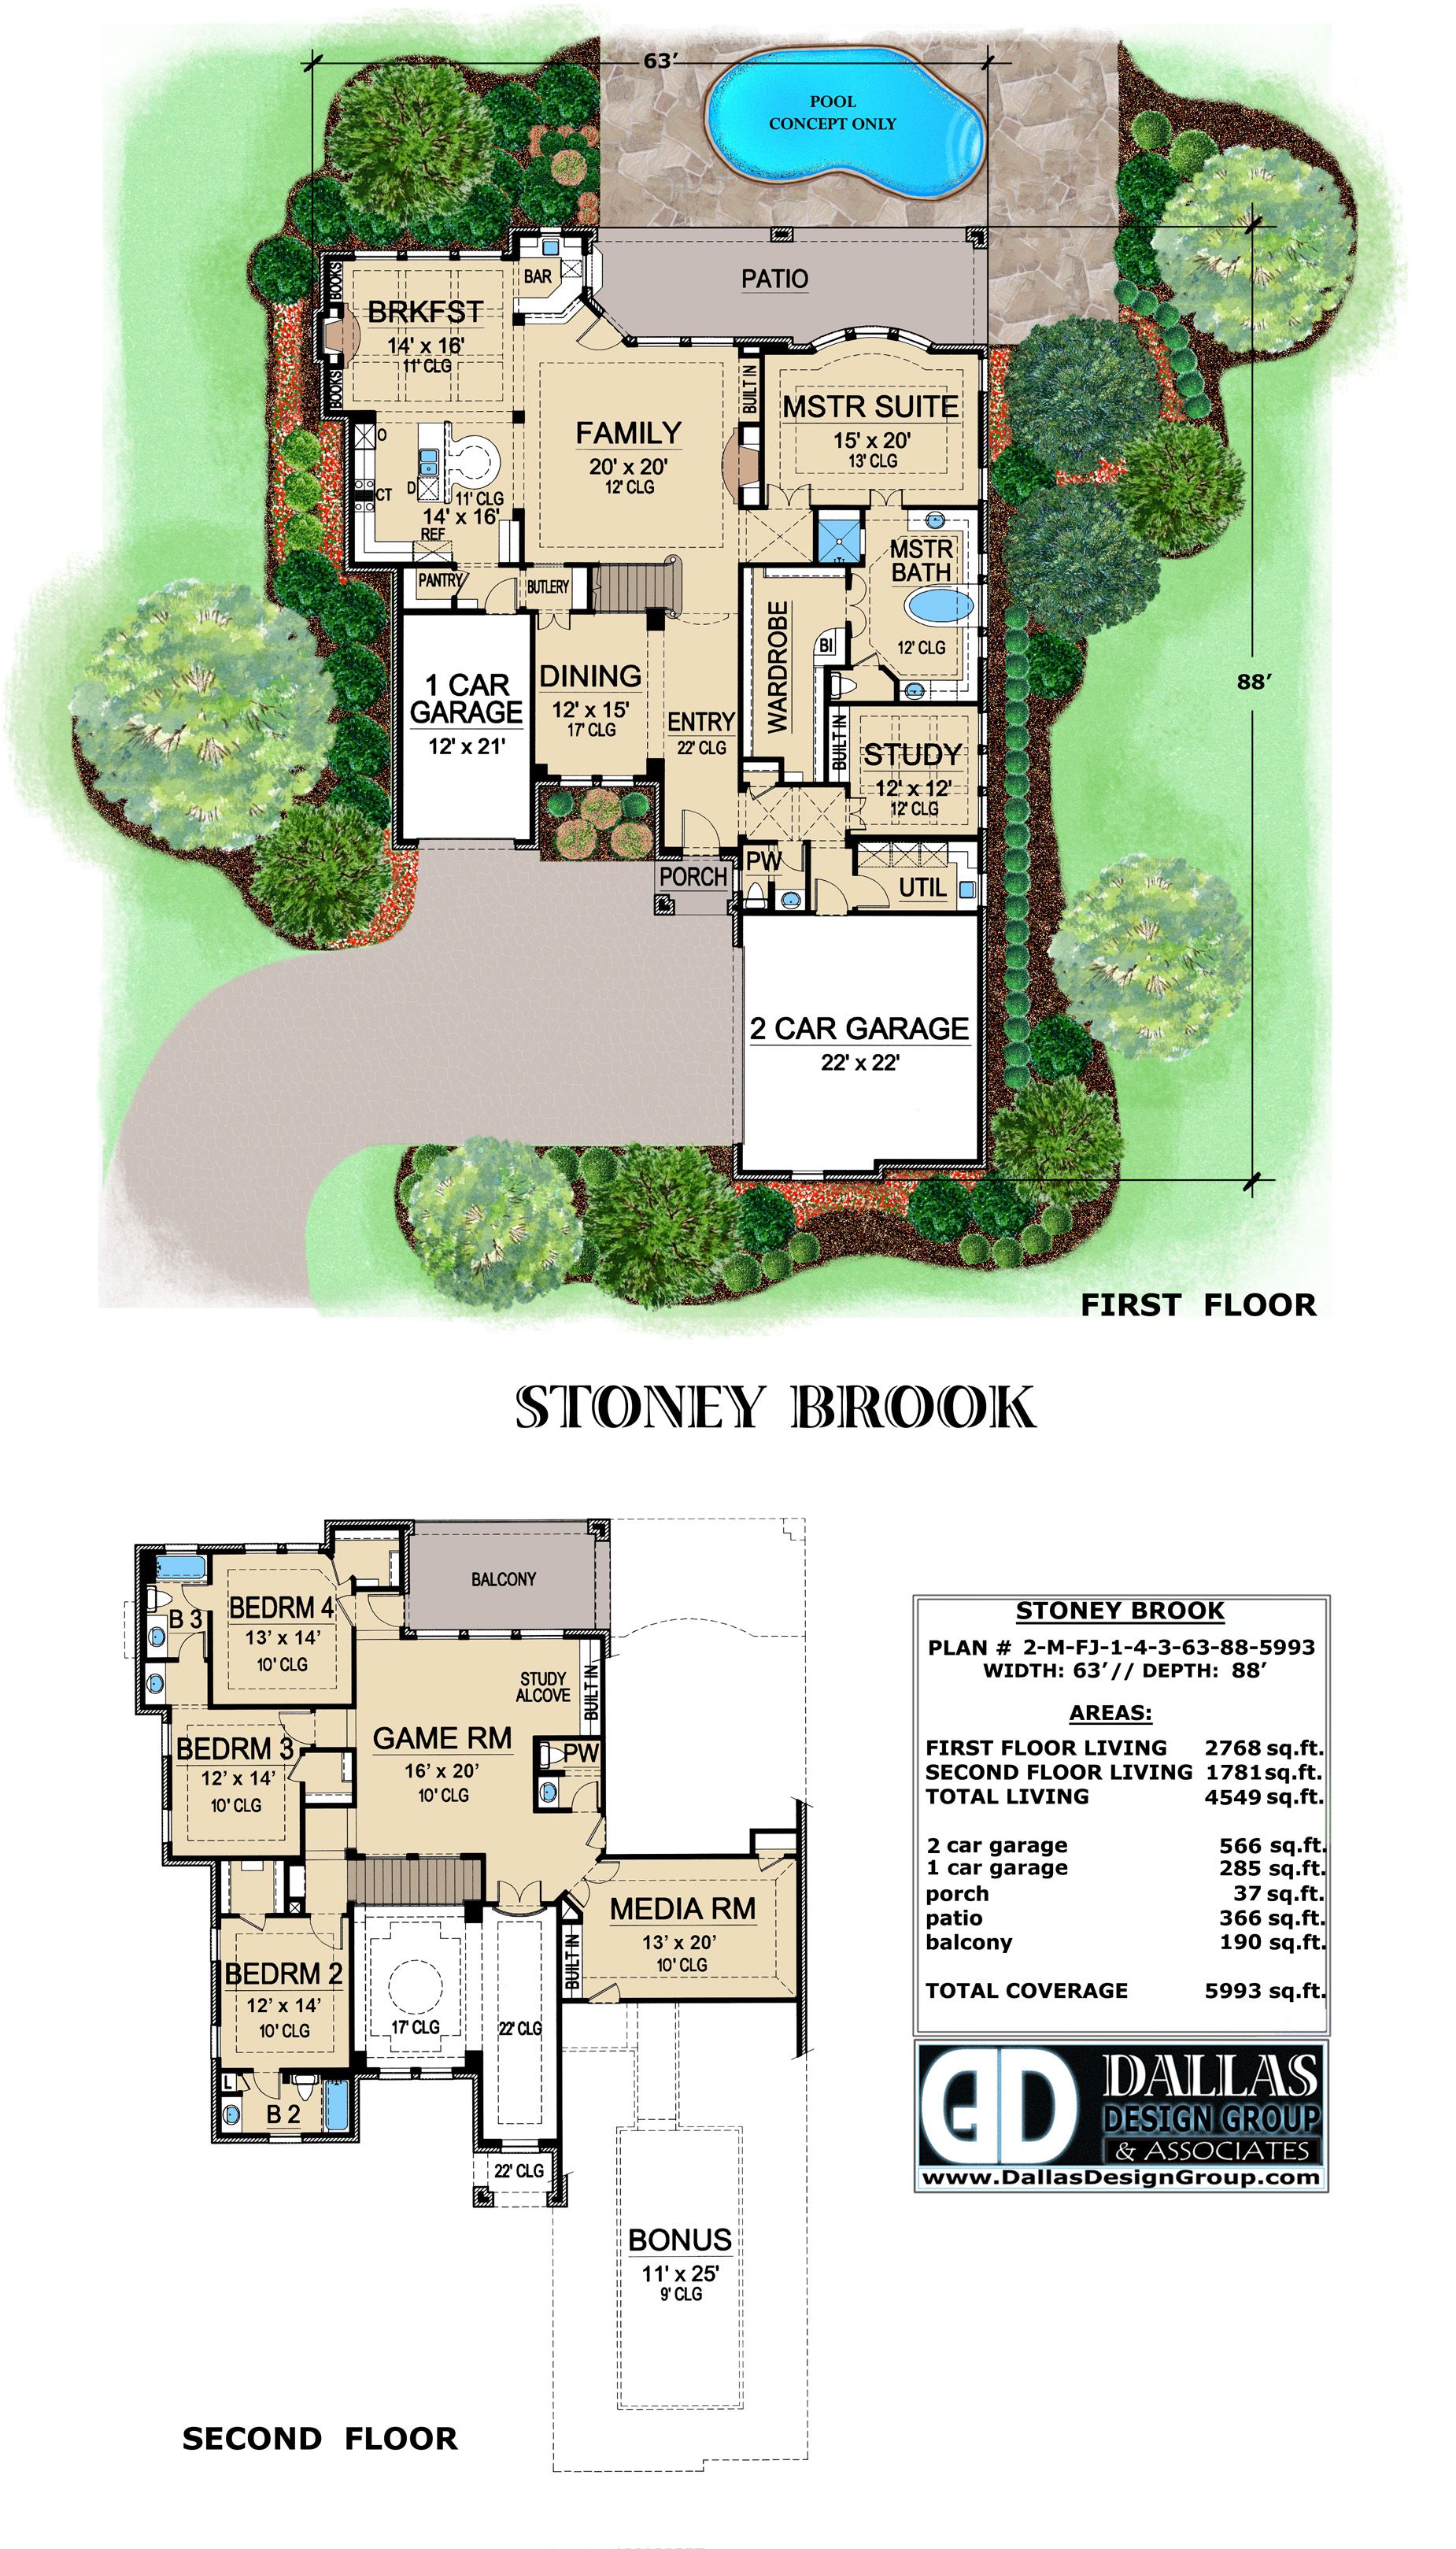 "Stoney Brook" House Plan from Dallas Design Group